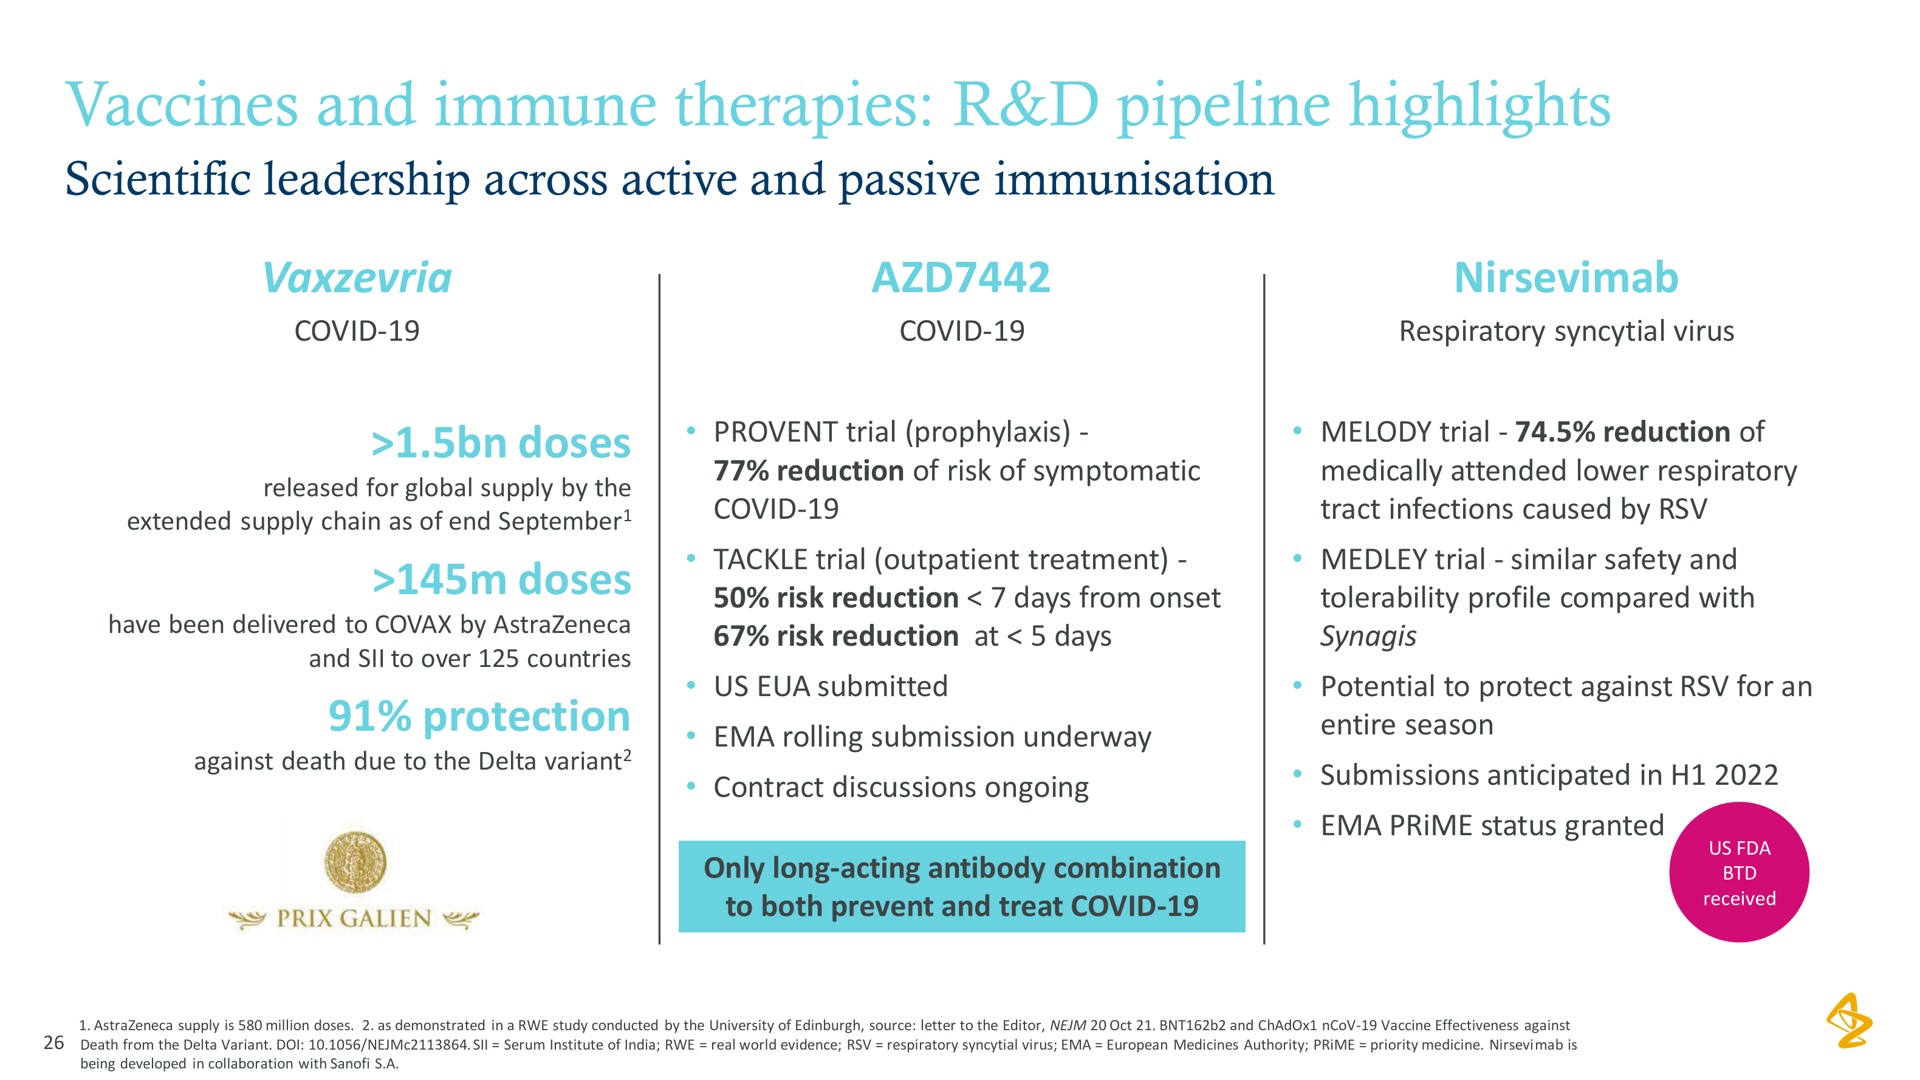 vaccines and immune therapies pipeline highlights | AstraZeneca